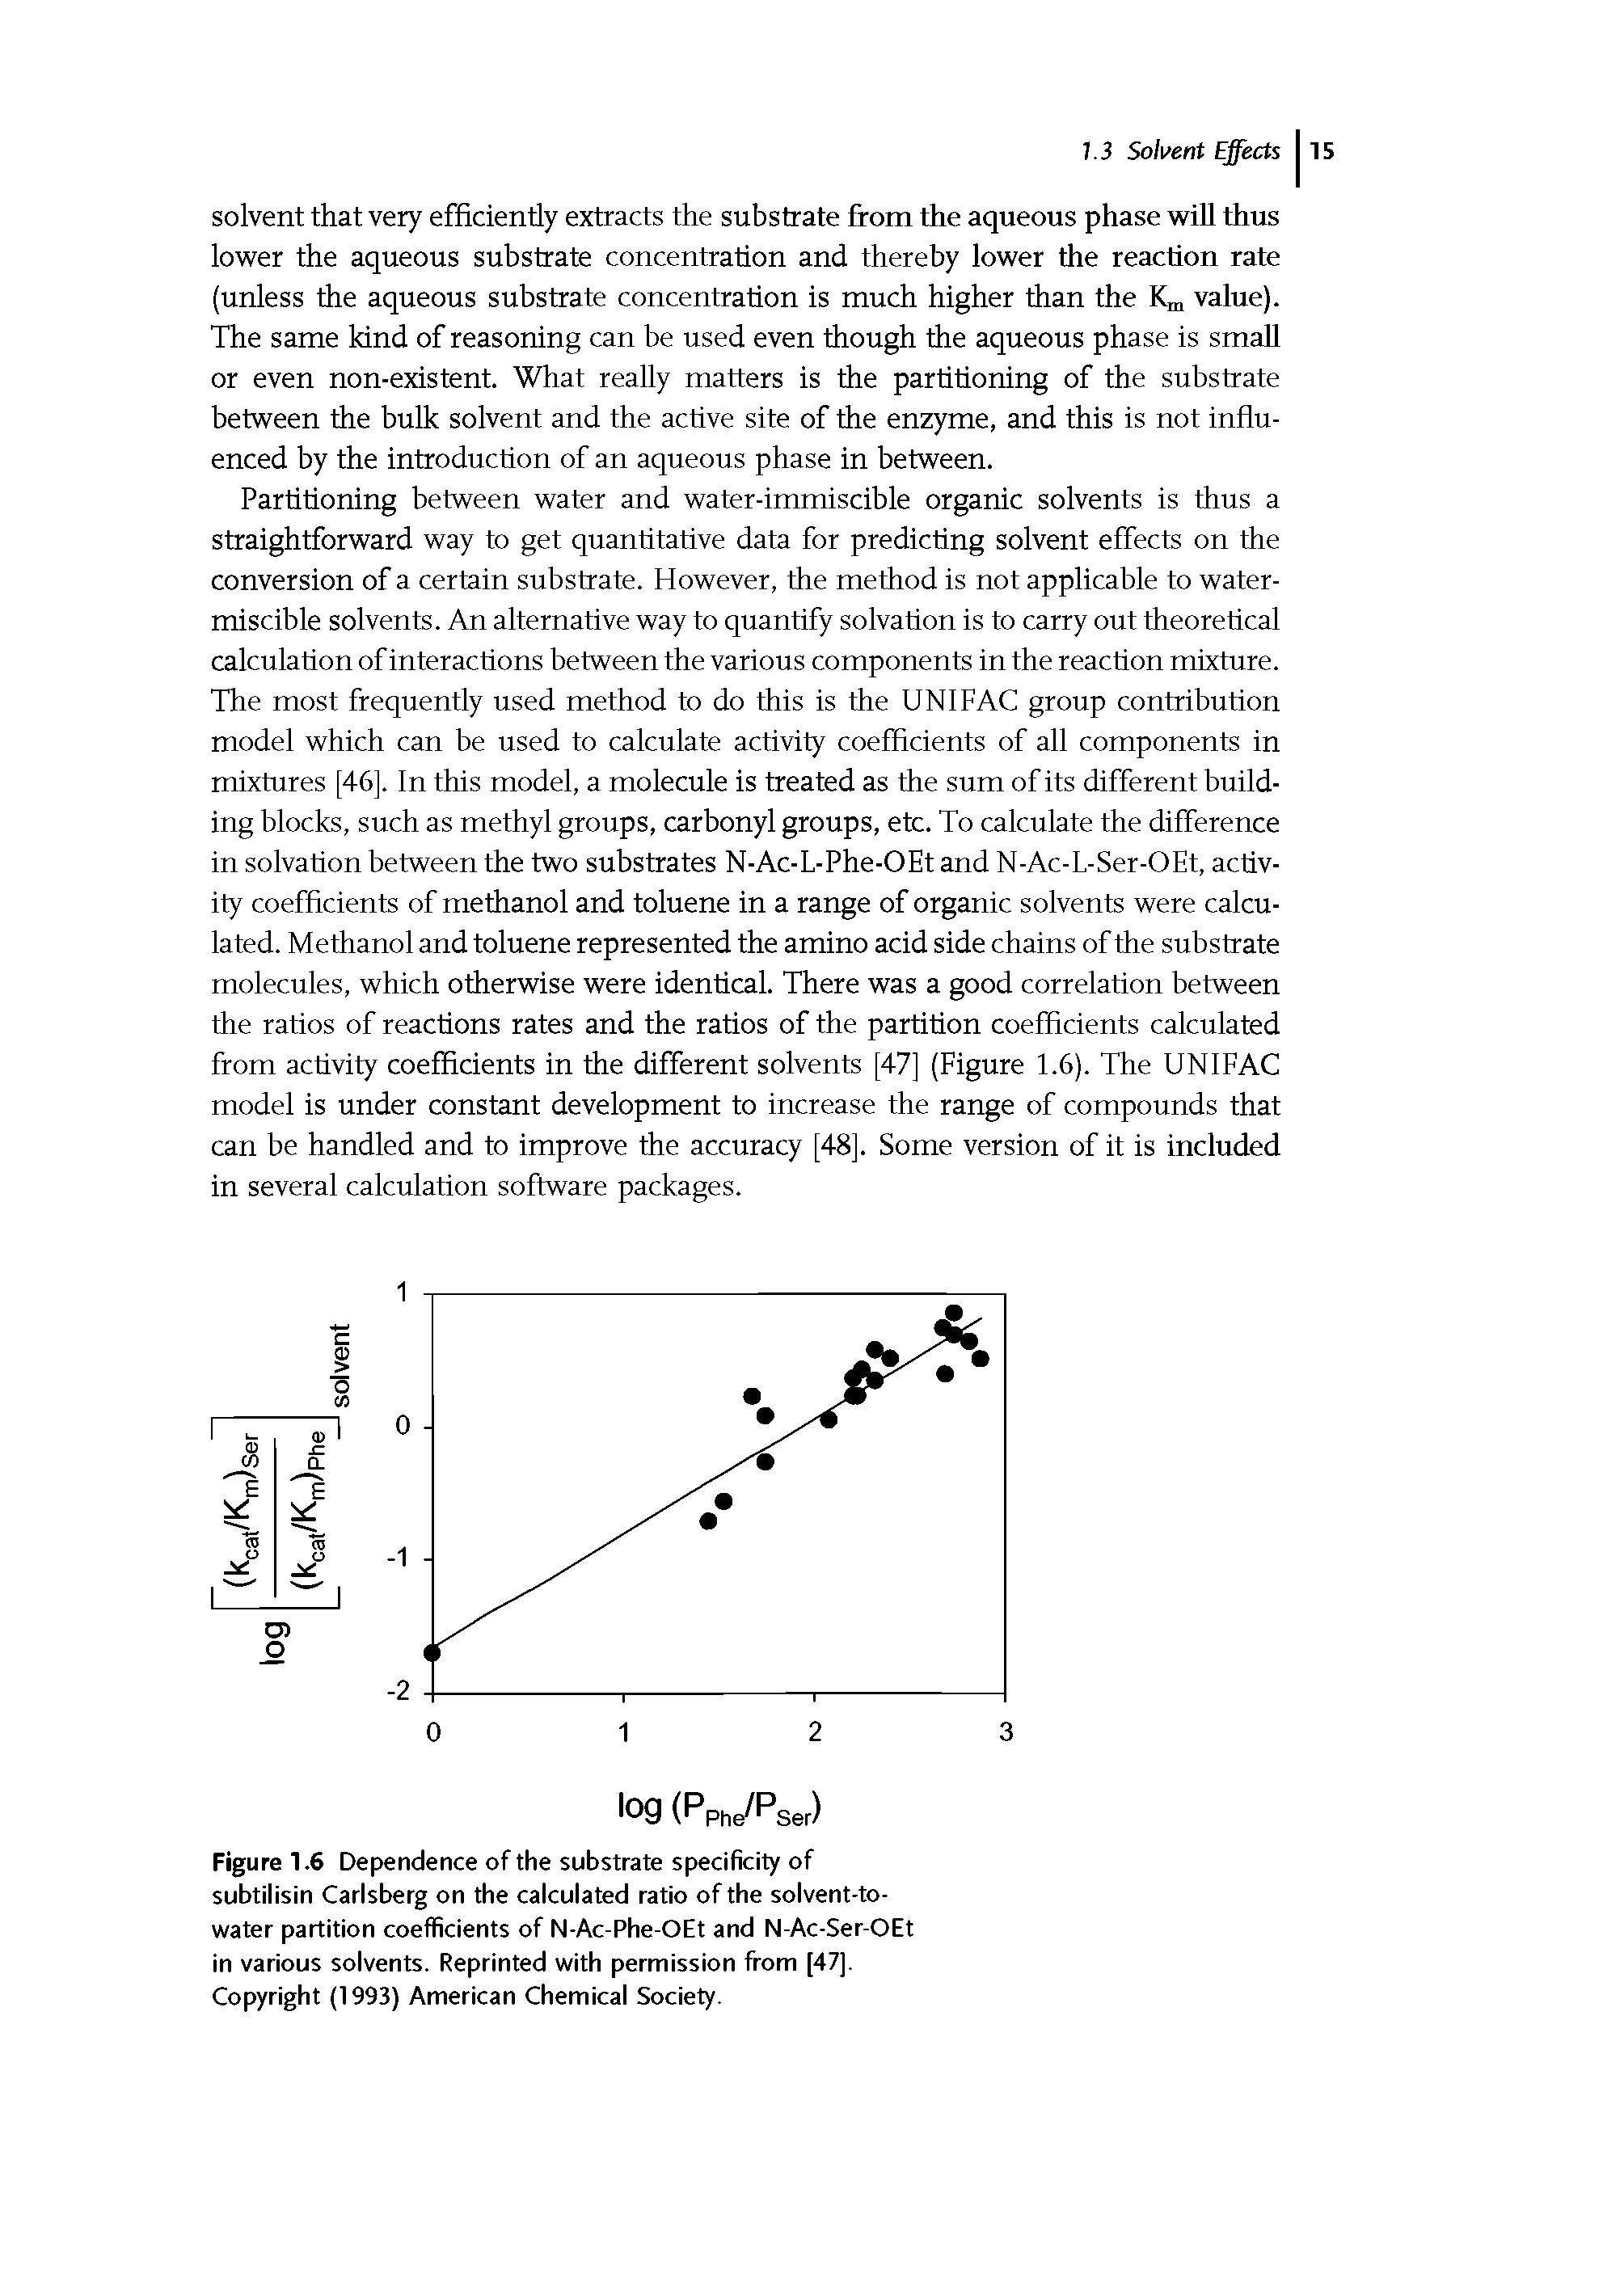 Figure 1.6 Dependence of the substrate specificity of subtilisin Carlsberg on the calculated ratio of the solvent-to-water partition coefficients of N-Ac-Phe-OEt and N-Ac-Ser-OEt in various solvents. Reprinted with permission from [47]. Copyright (1993) American Chemical Society.